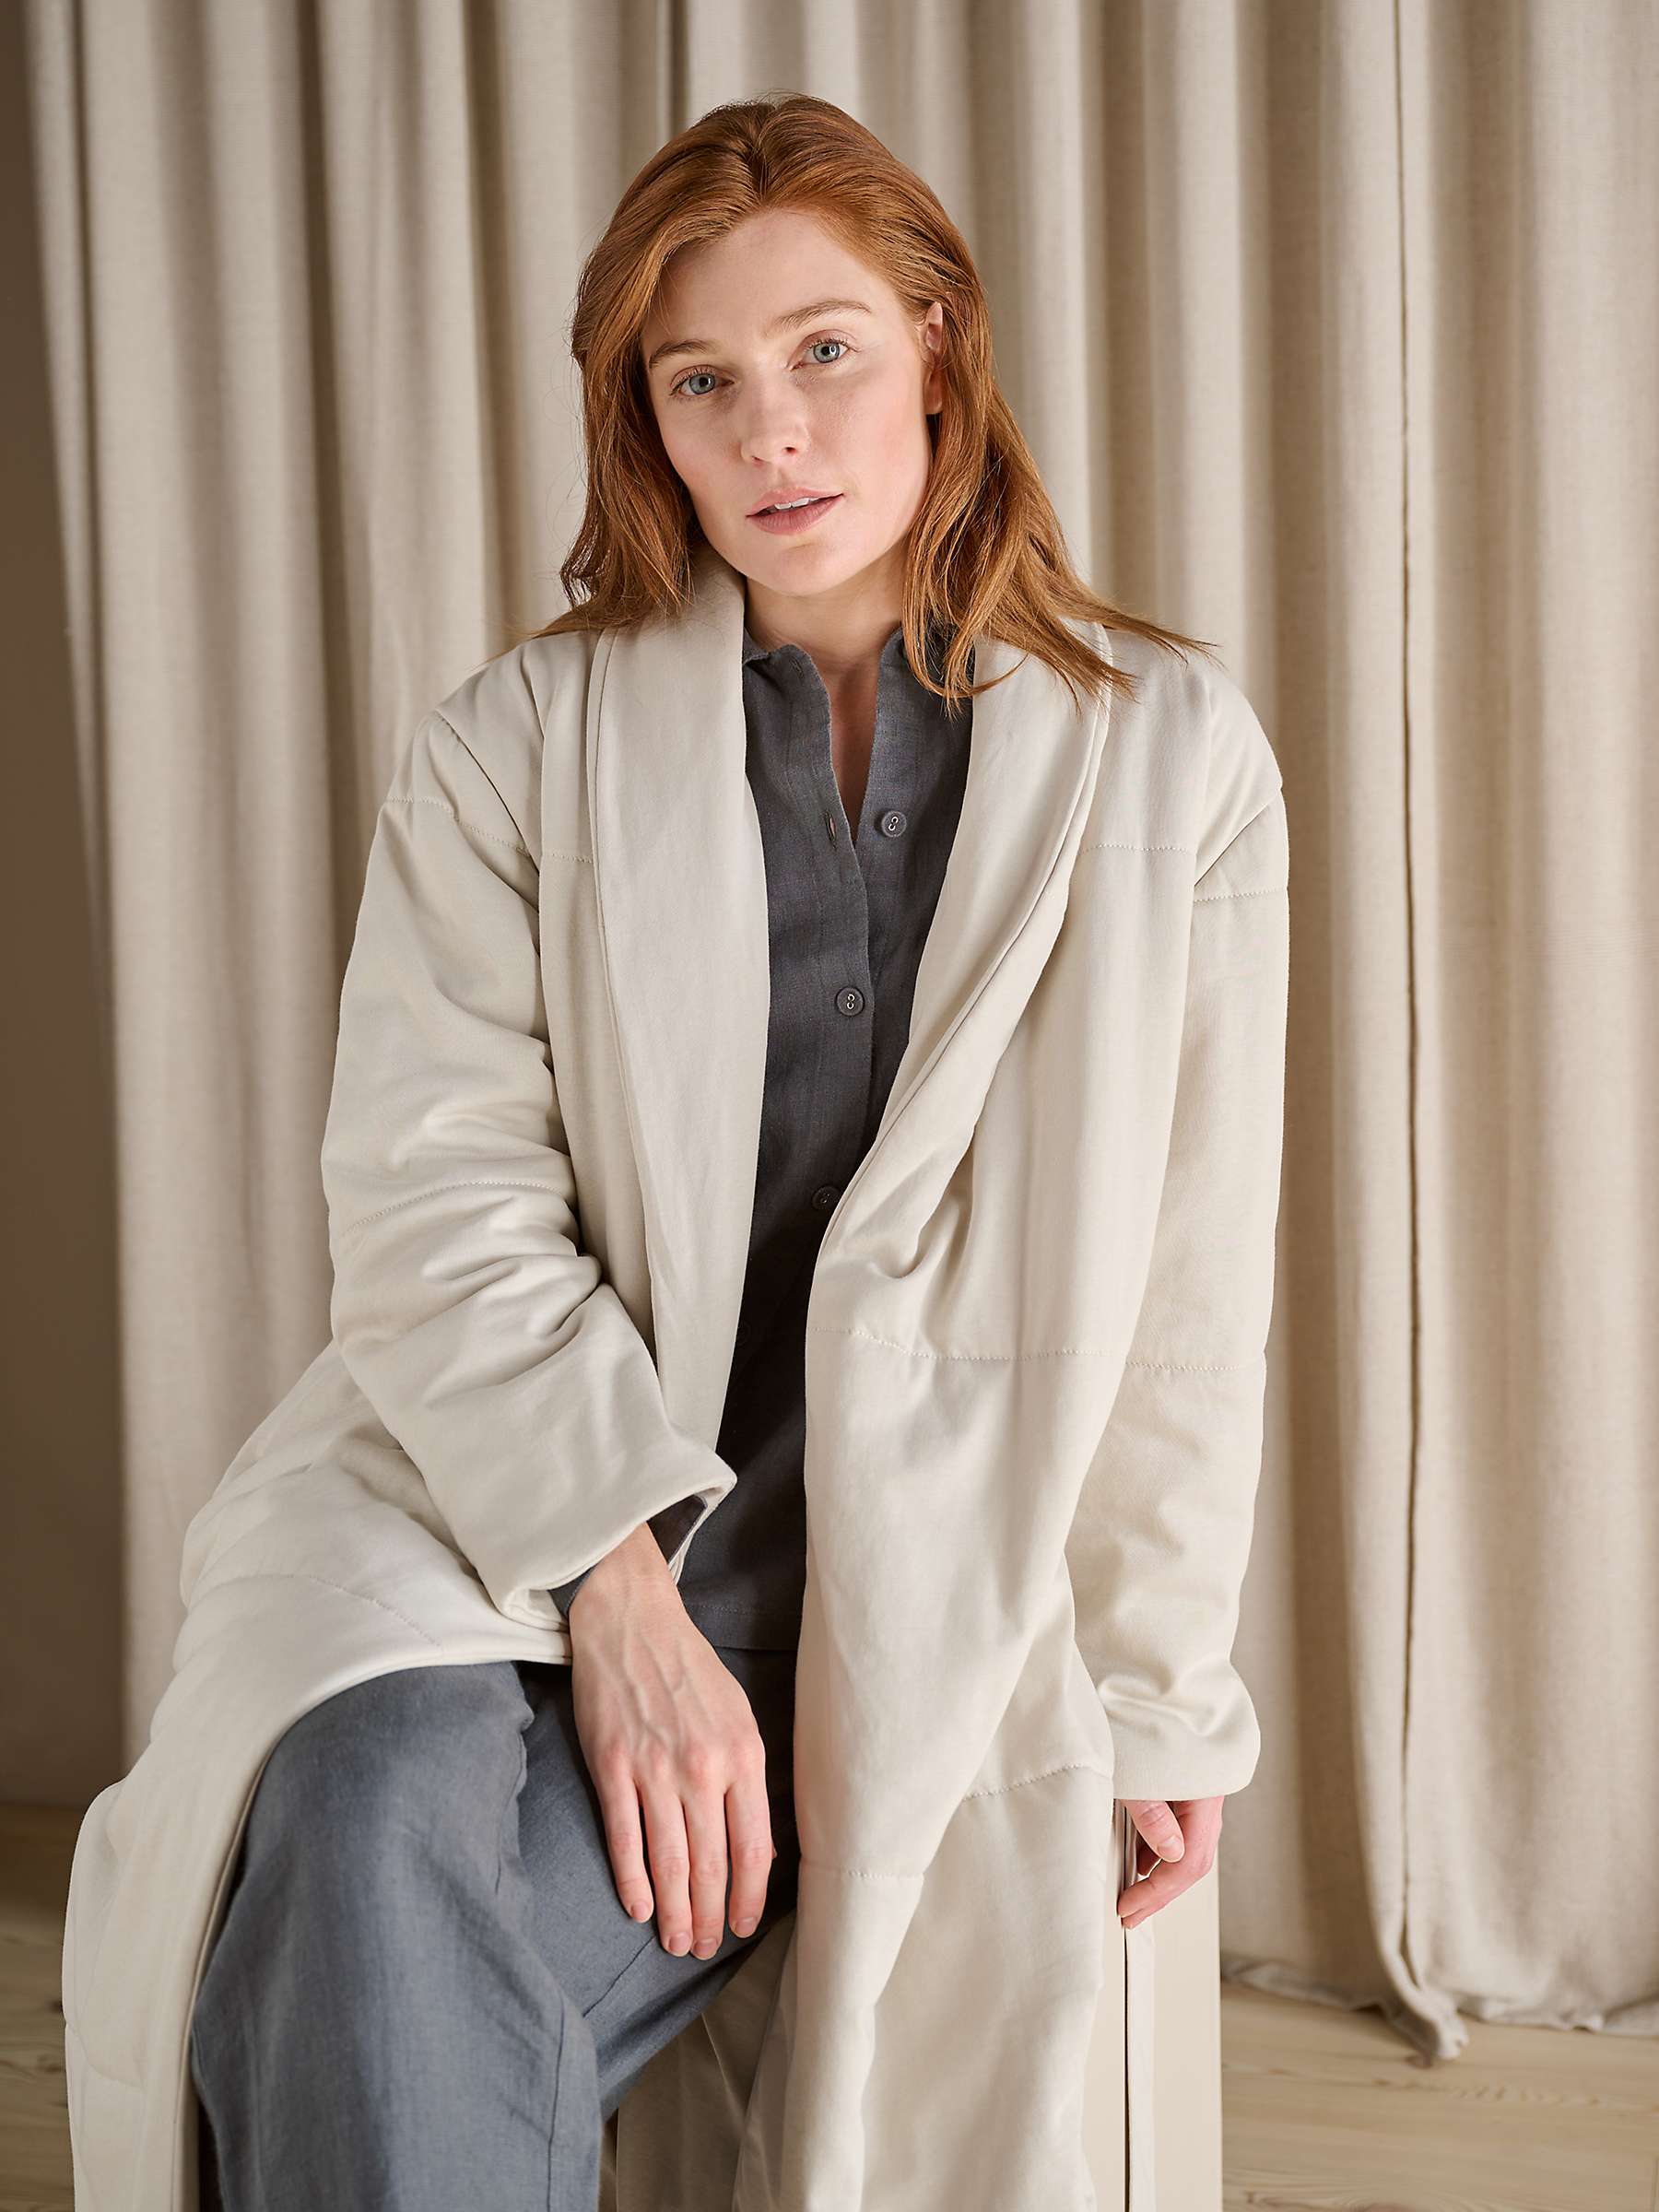 Buy Bedfolk Housecoat Cotton Dressing Gown Robe, Clay Online at johnlewis.com